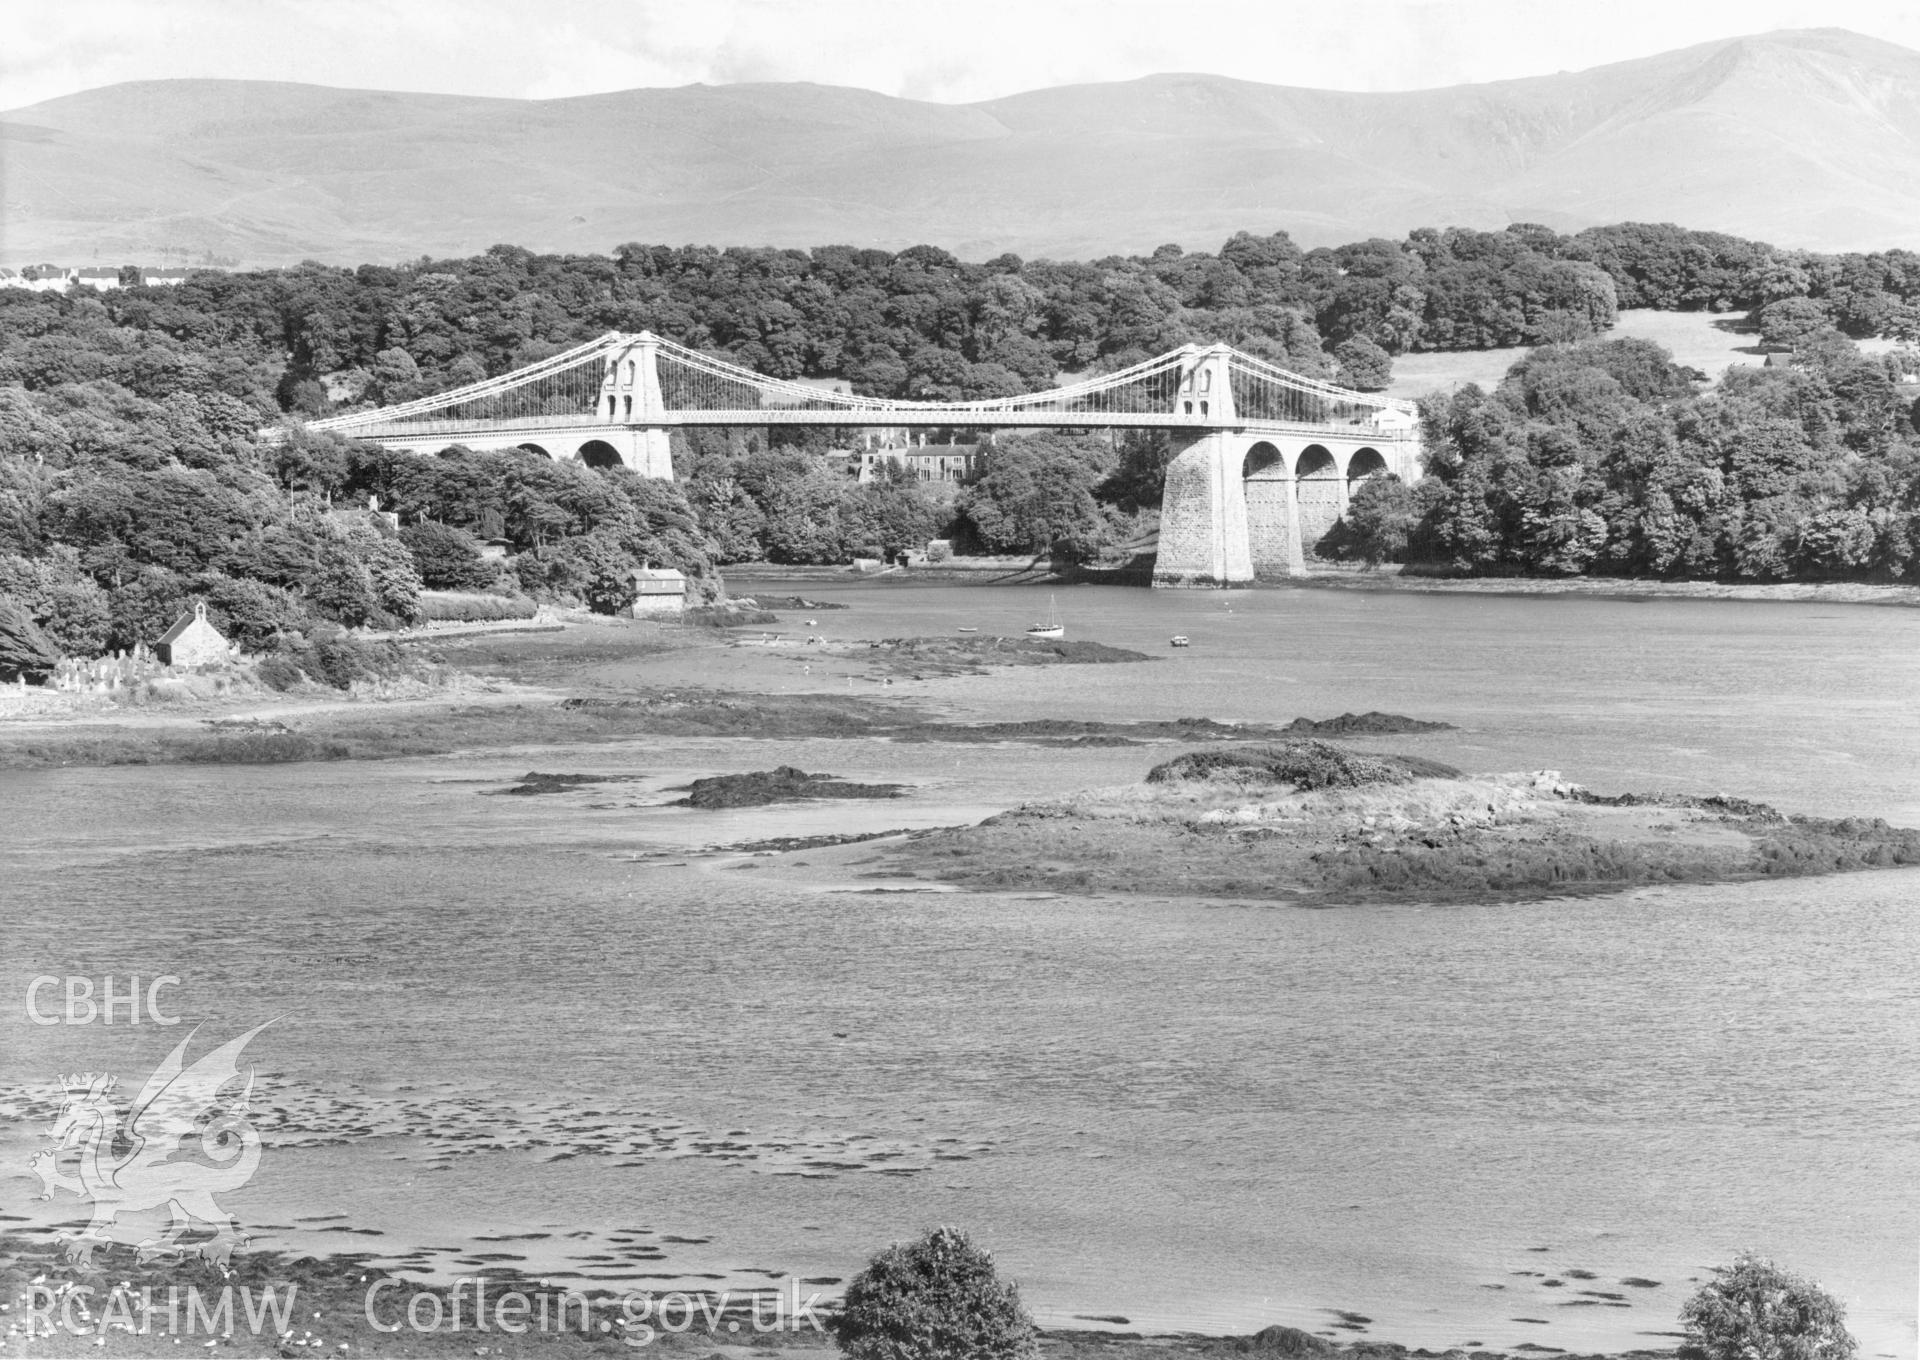 1 b/w print showing Menai suspension bridge, collated by the former Central Office of Information.